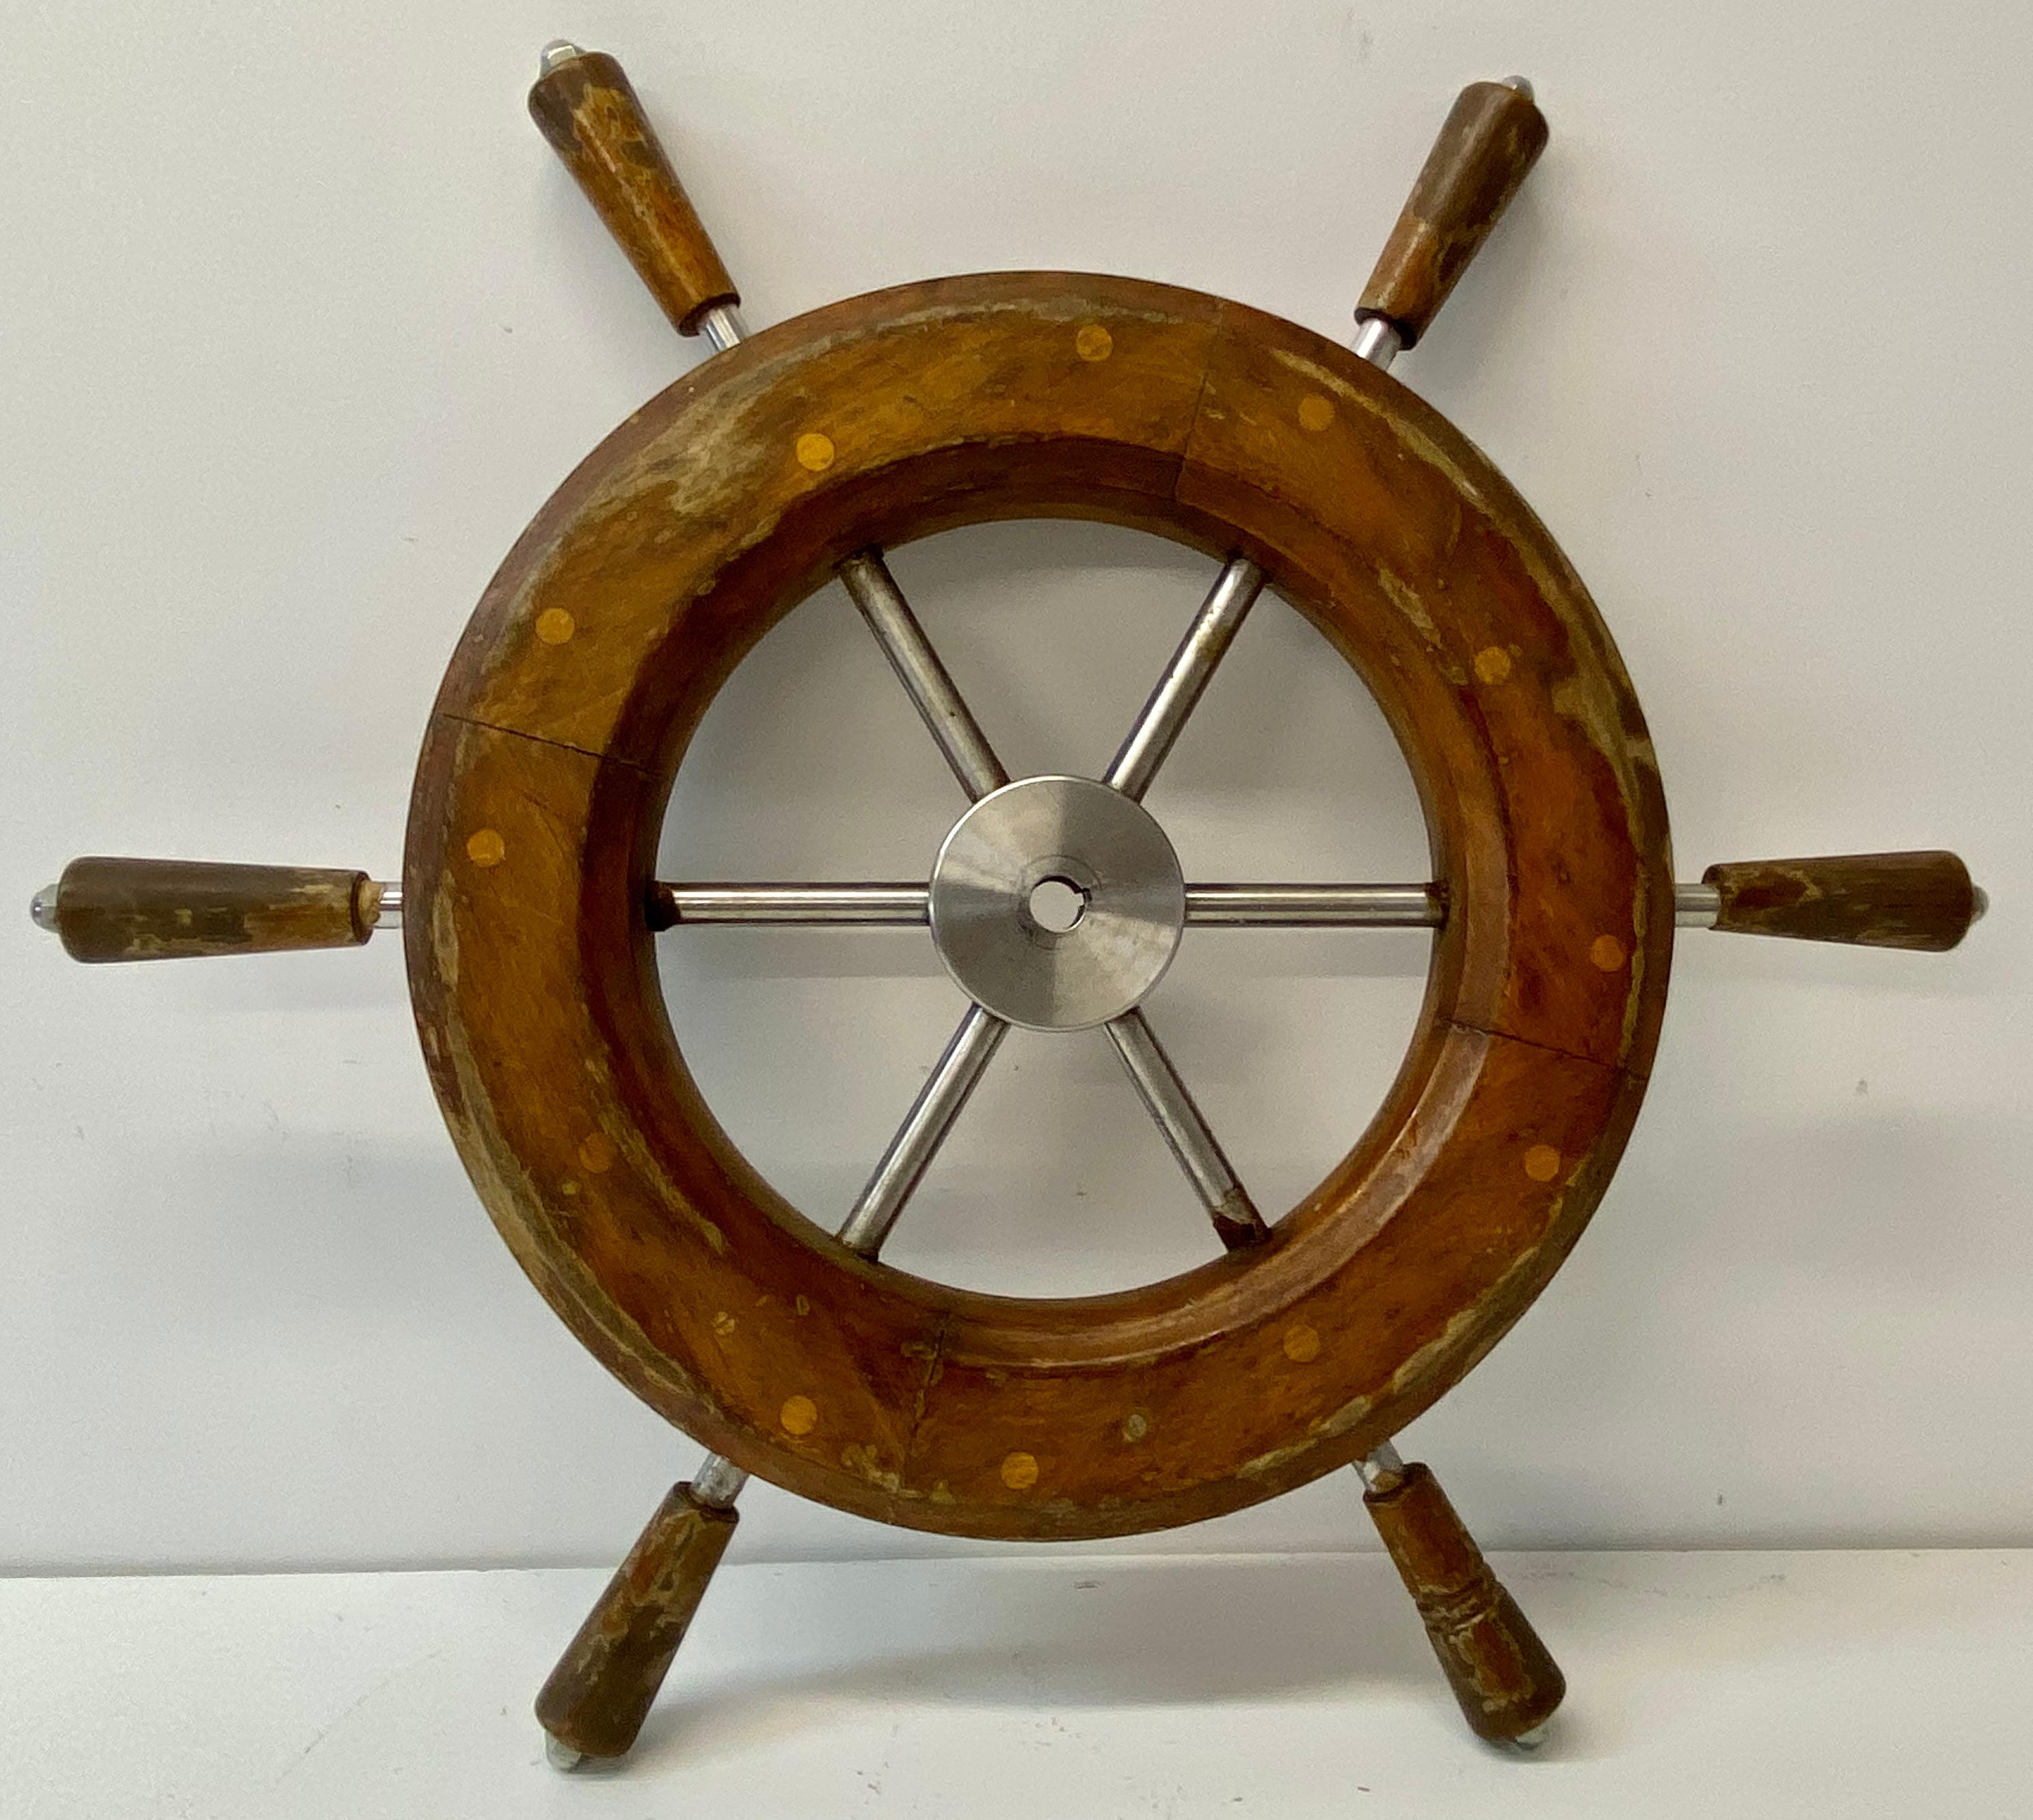 Early to Mid 20th Century Teak and Aluminum Ships Wheel 1930s to 1950s In Good Condition For Sale In San Francisco, CA